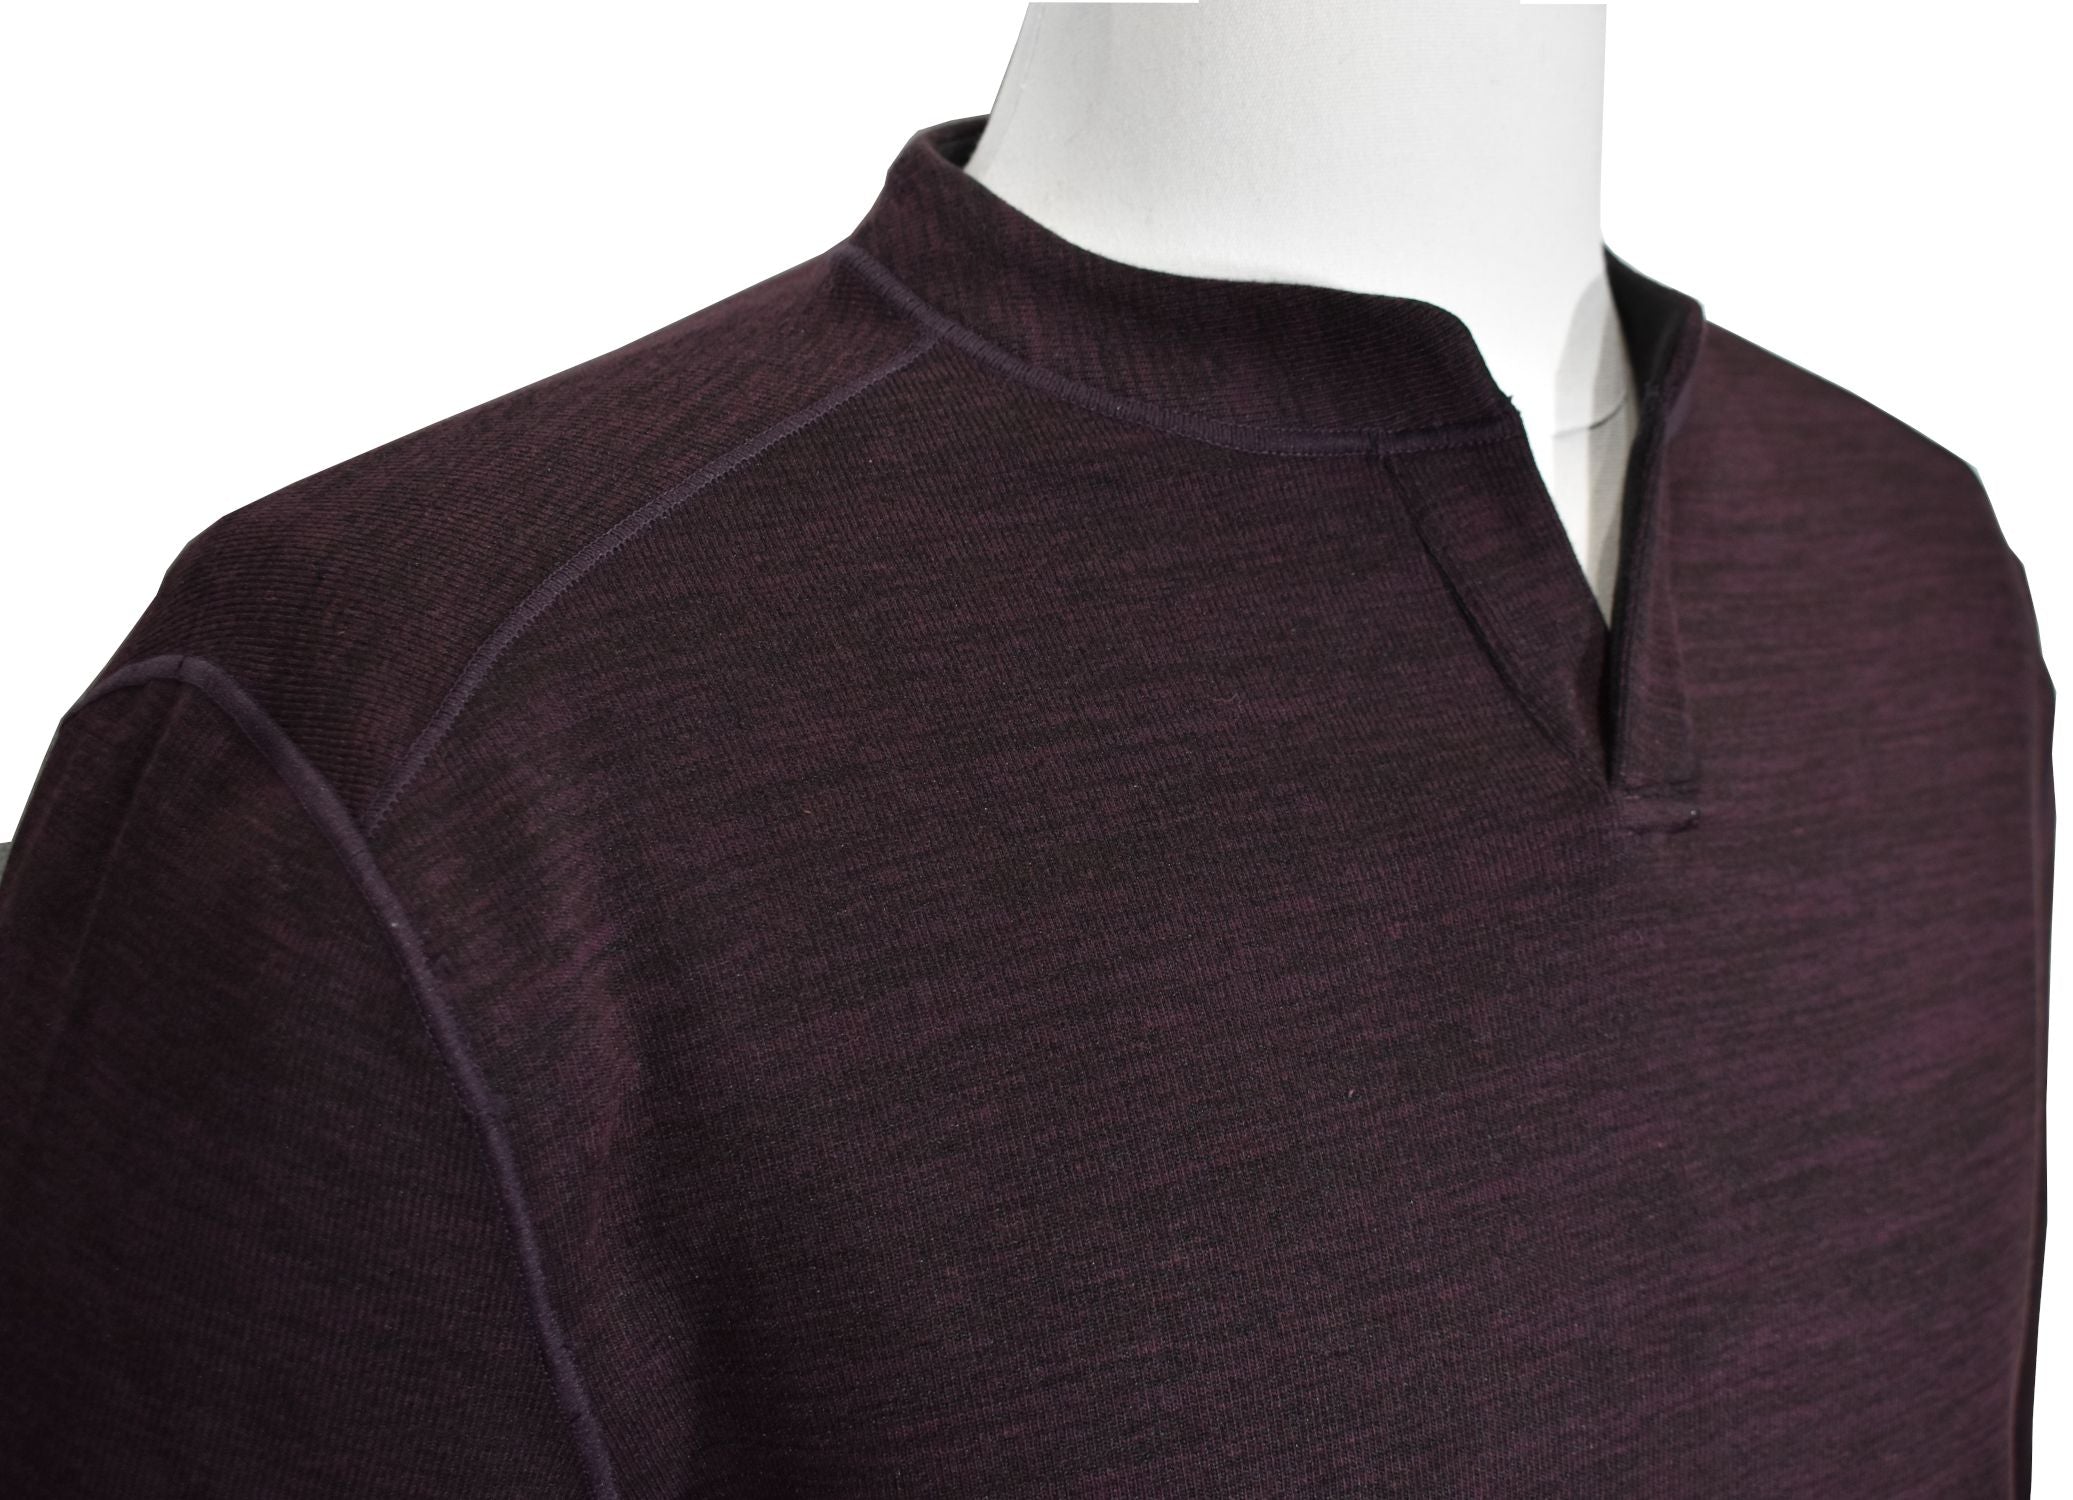  Rock a double look on the go with the ZN5740 Reversible Johnny Crew. Crafted with medium weight cotton microfiber fabric that feels like cashmere, this pullover features a v-neckline, raised welted seams, and a classic fit. Plus, it flips from wine to dark charcoal with a simple spin, so you get two styles in one!